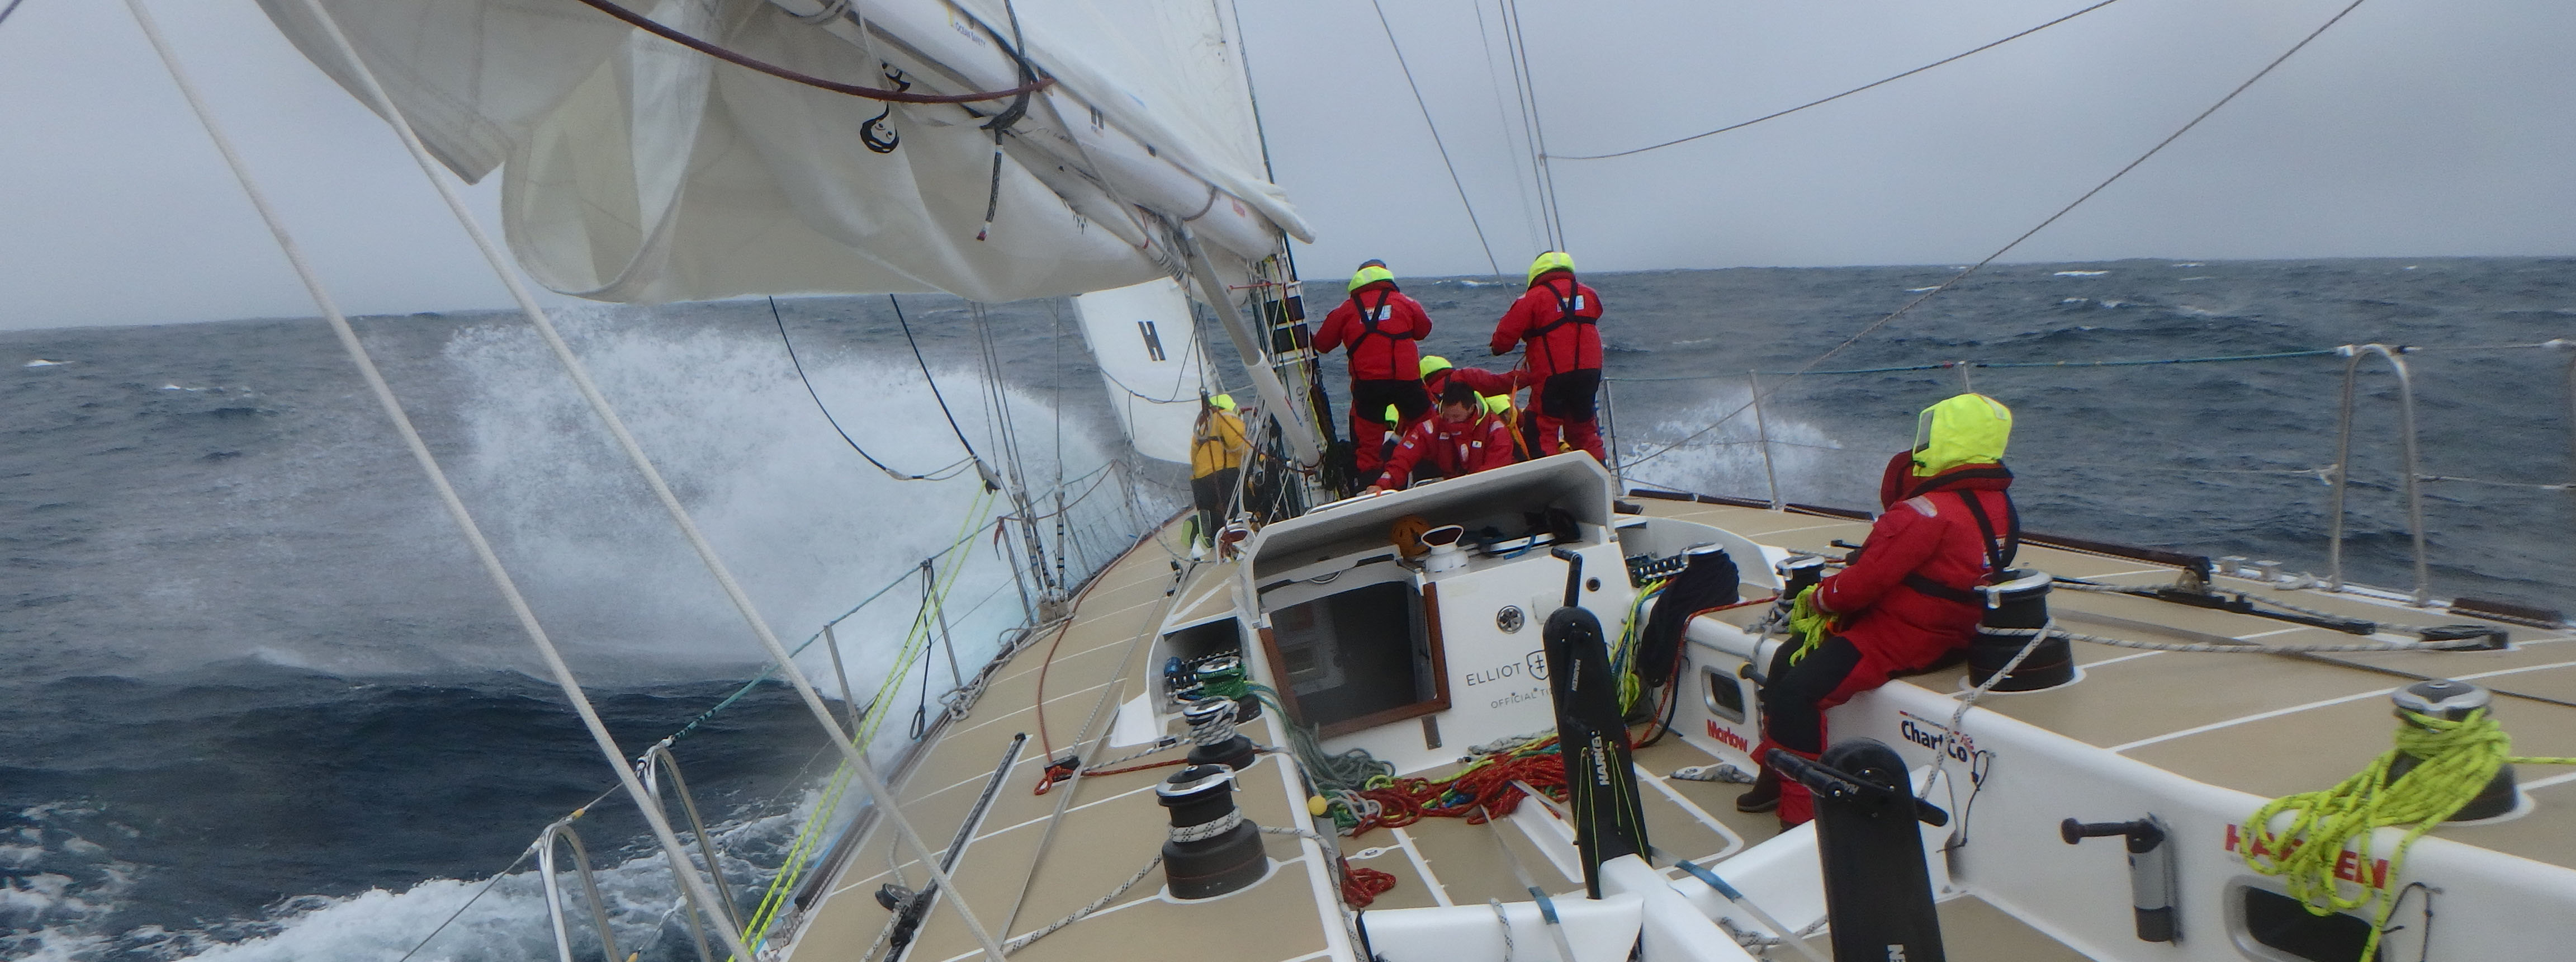 ​Race 3 Day 12: Front moves over fleet bringing more exhilarating conditions